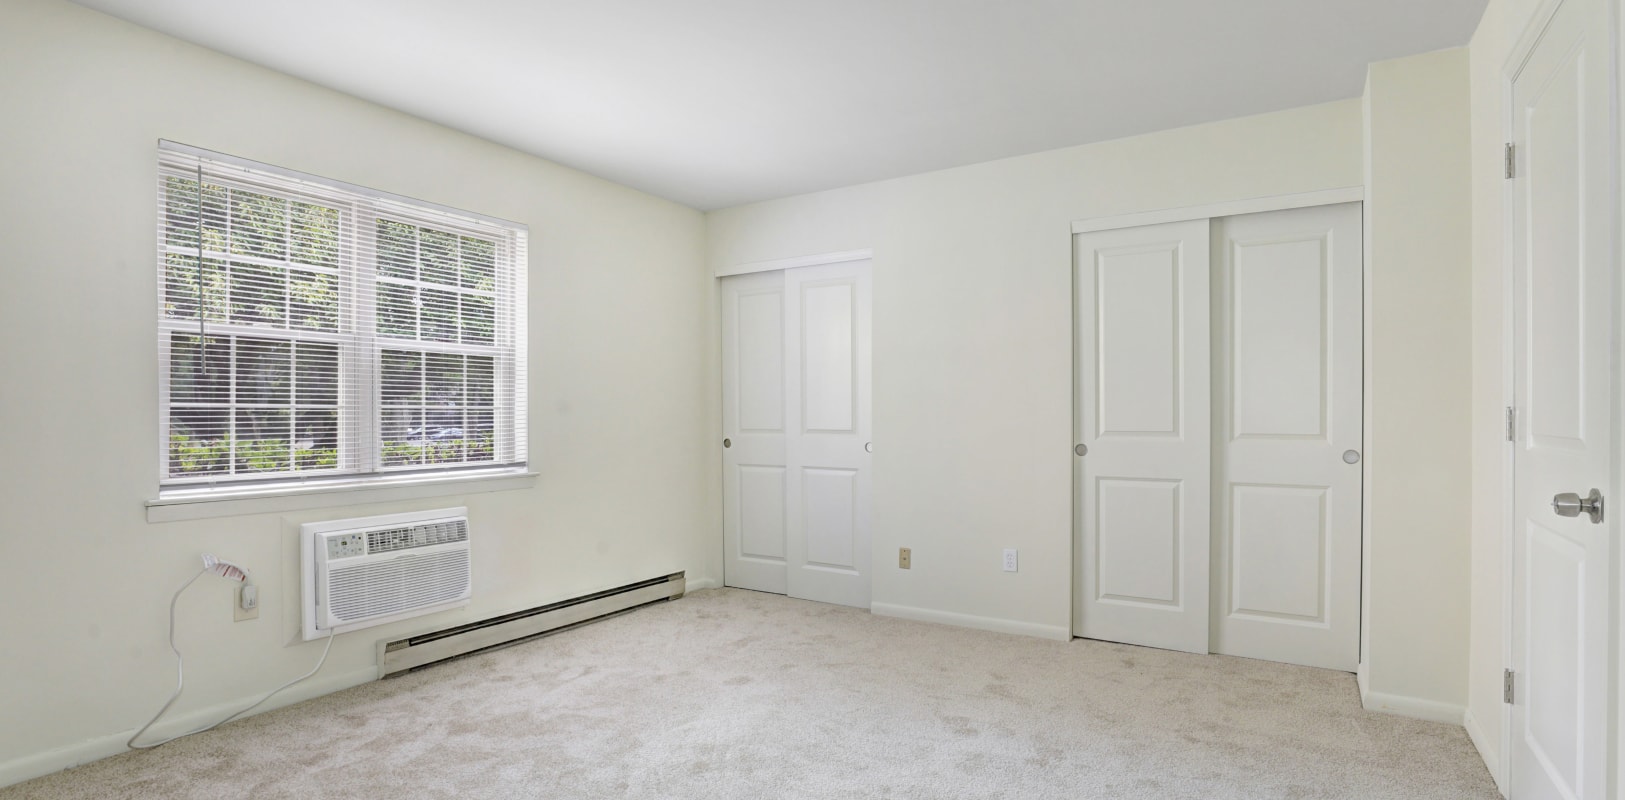 Bedroom at Sharon Arms Apartments in Robbinsville, New Jersey